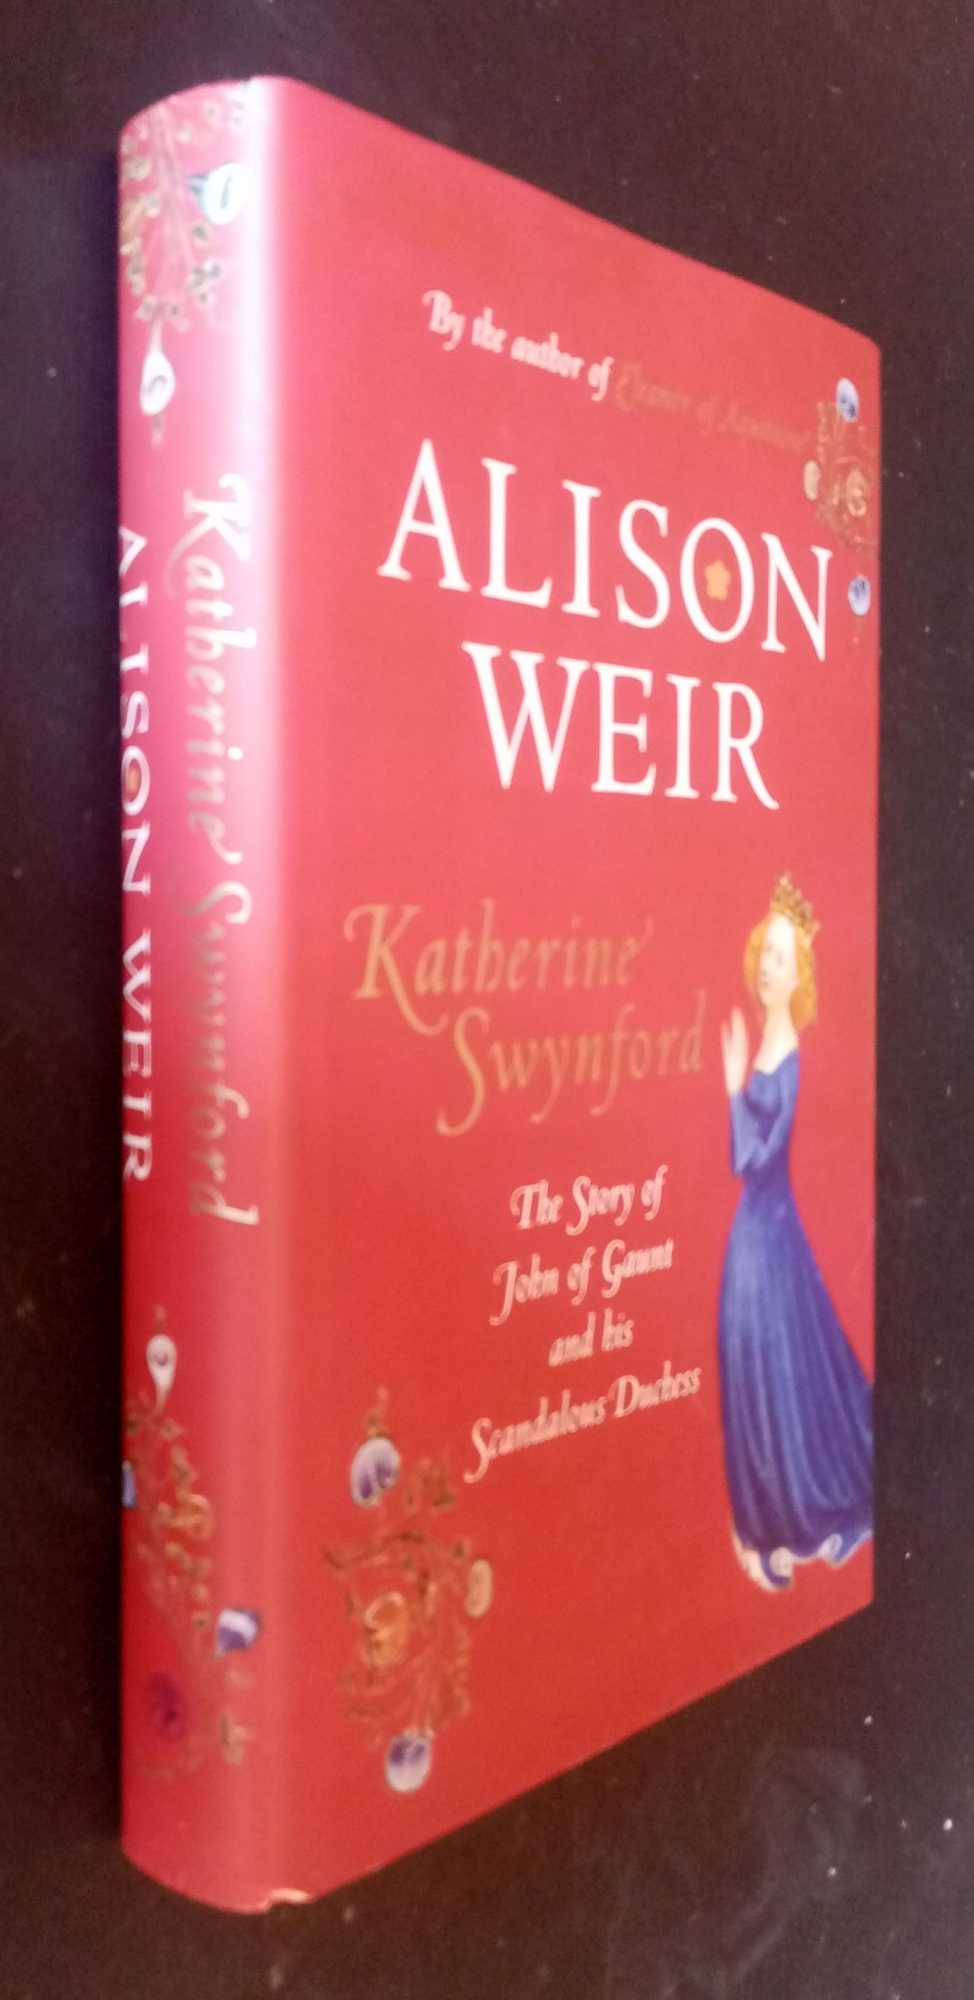 Alison Weir - Katherine Swynford, The Story of John of Gaunt and His Scandalous Duchess